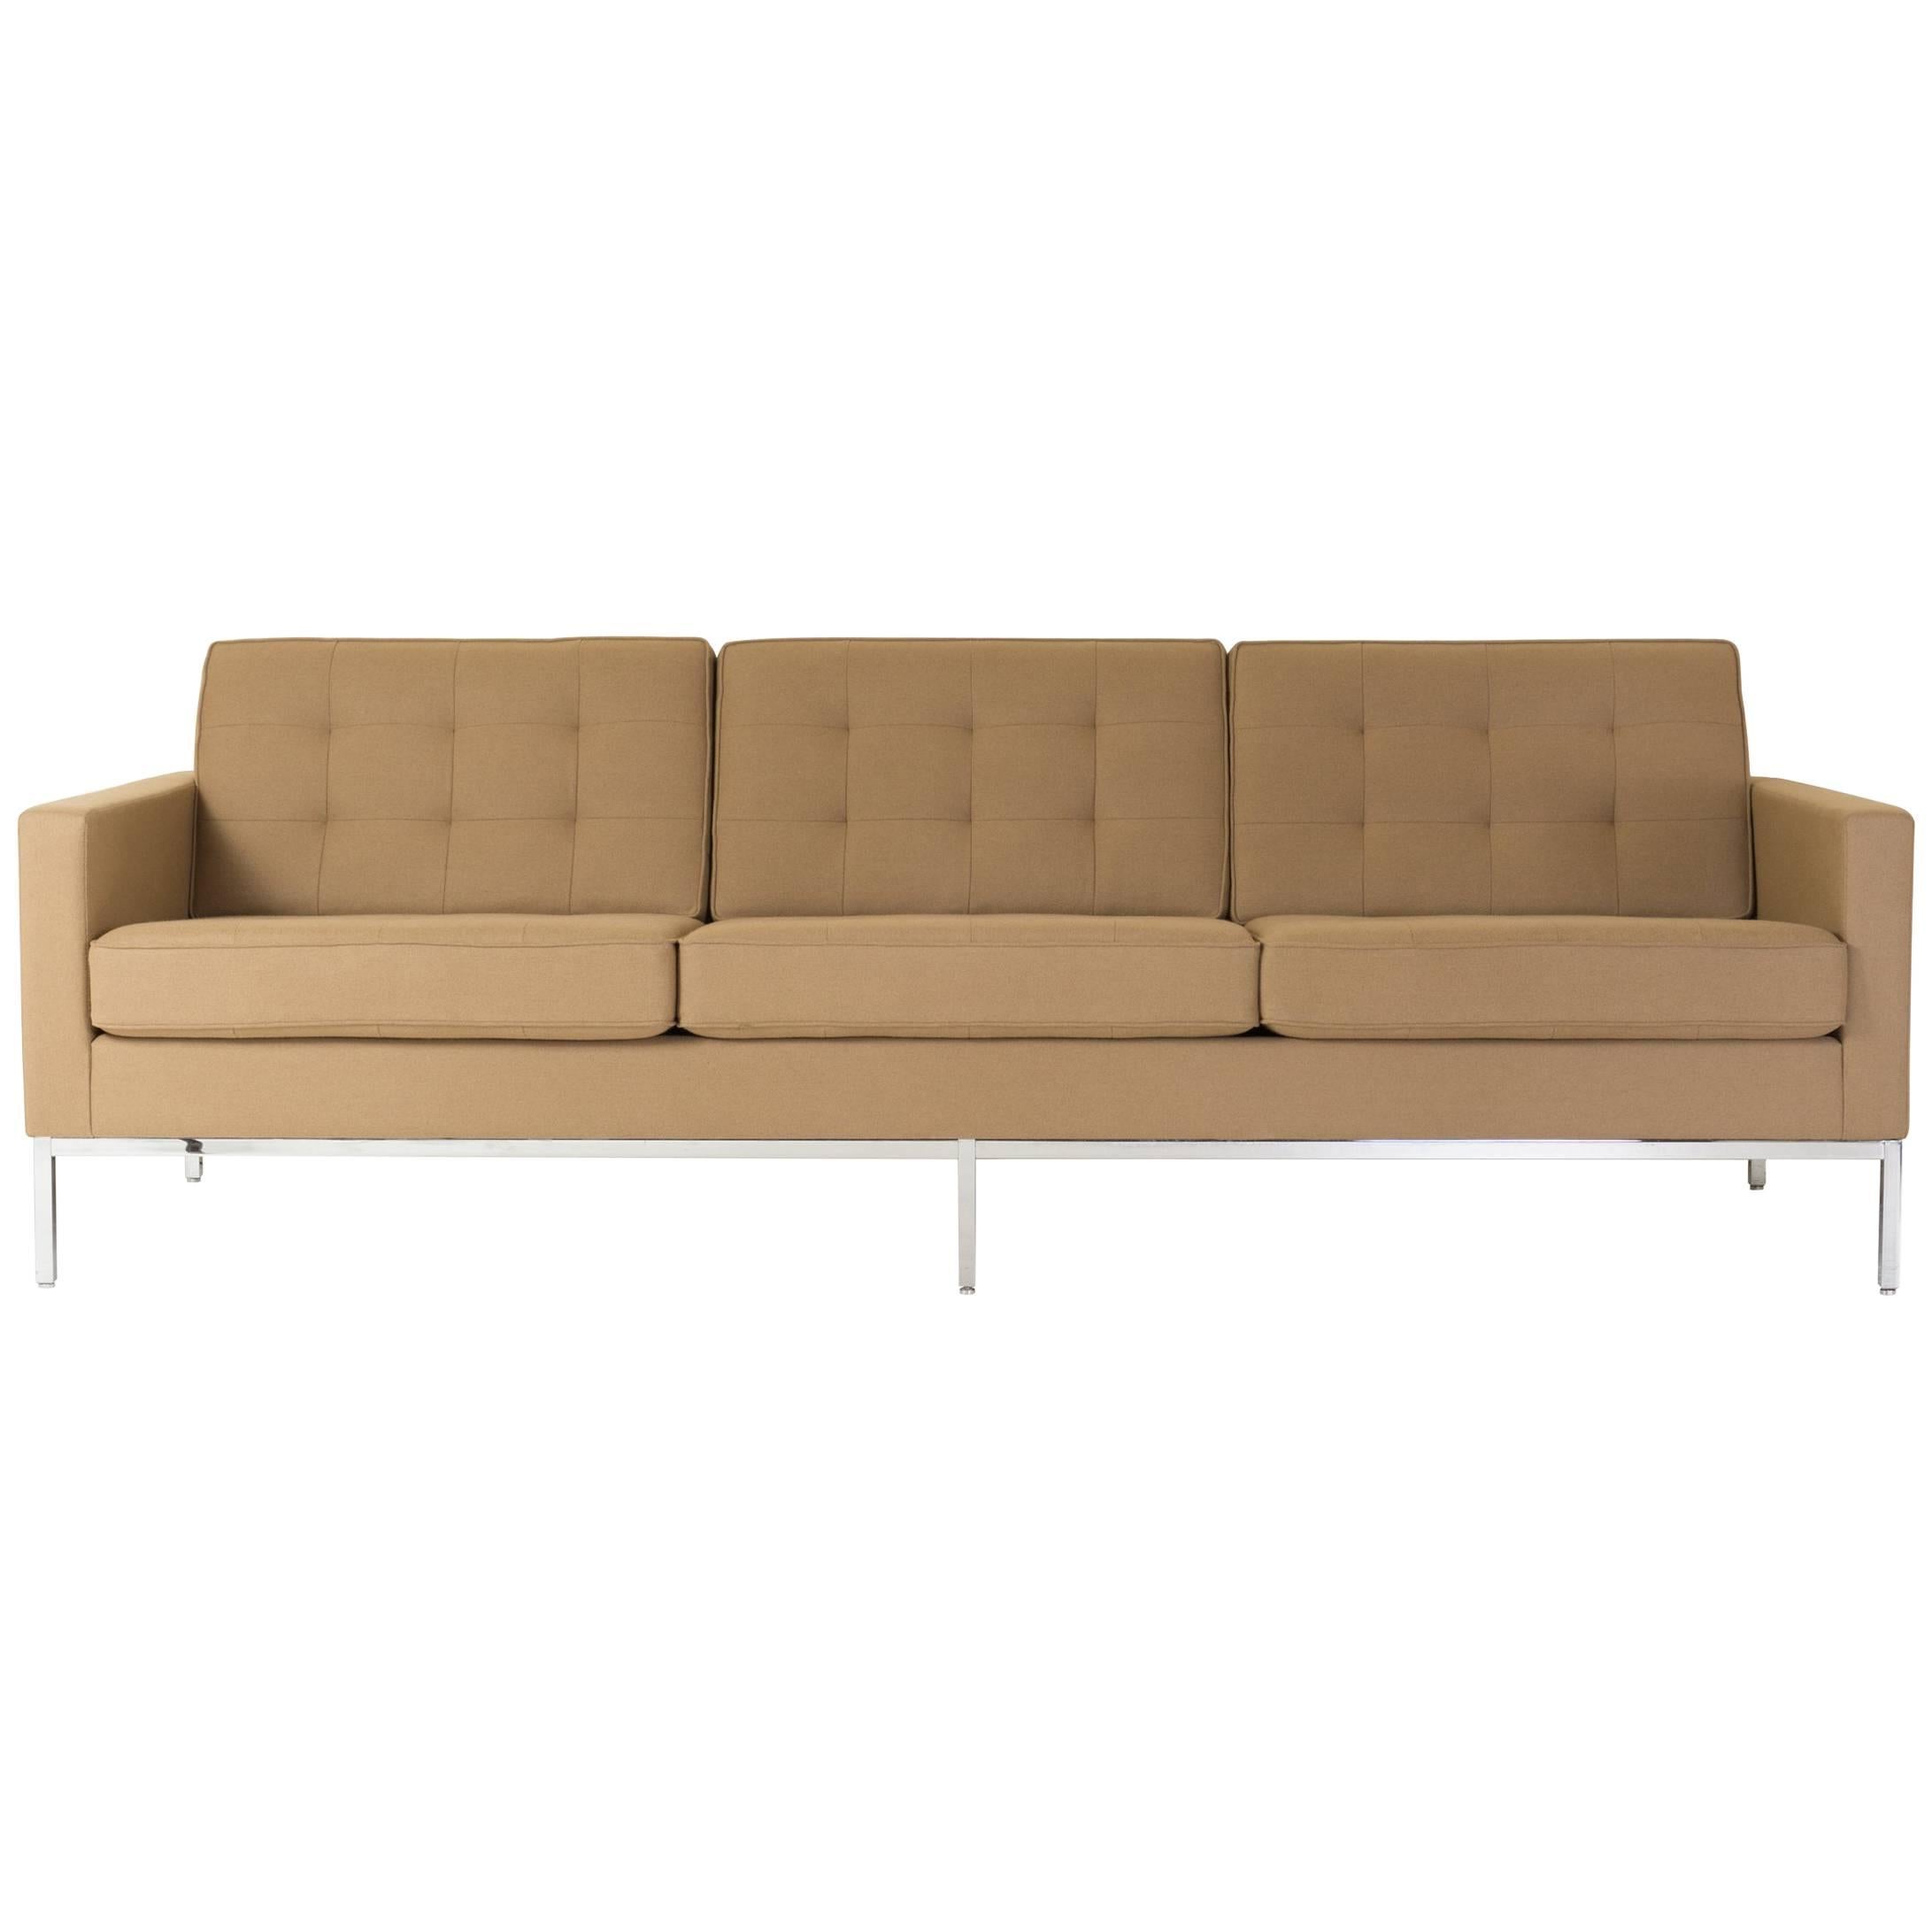 Florence Knoll Sofa in Camel Wool Flannel